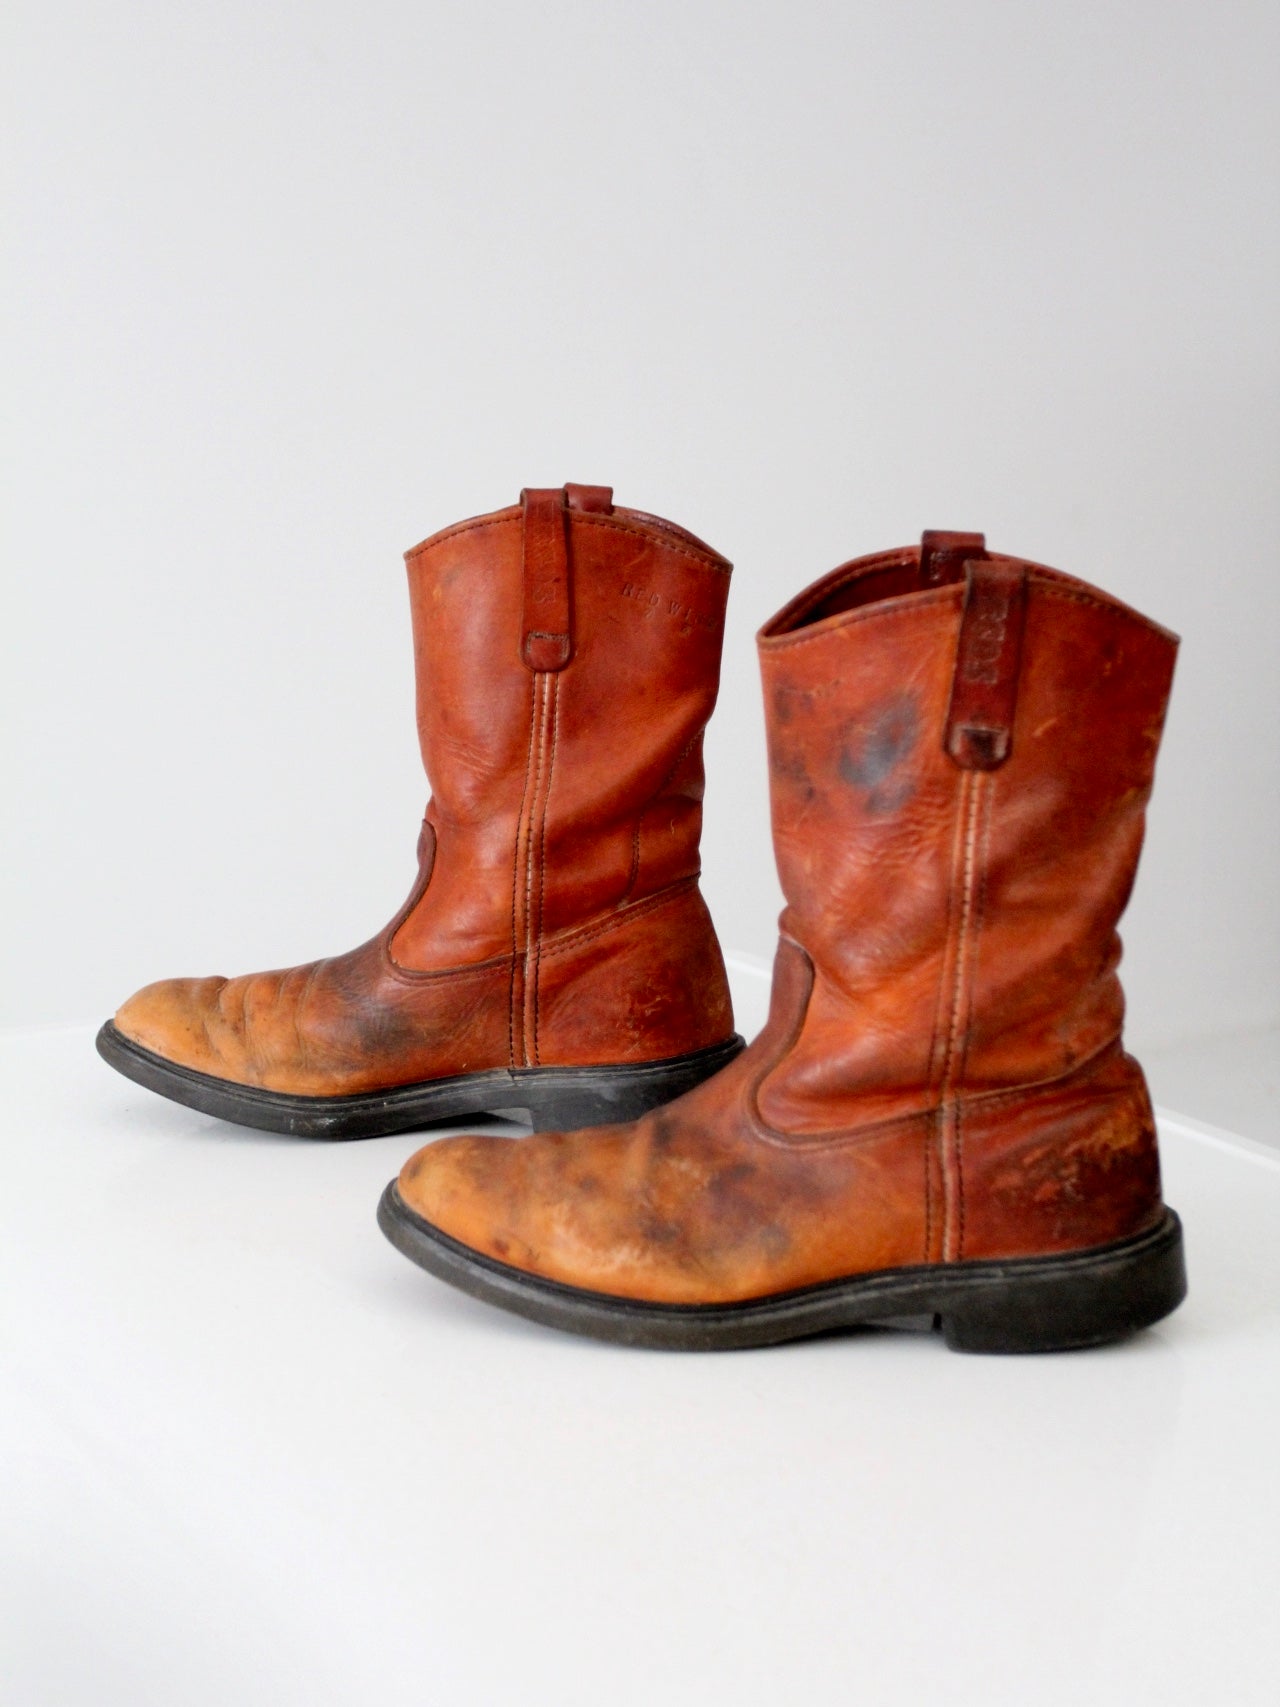 vintage Red Wing work boots, 10.5 – 86